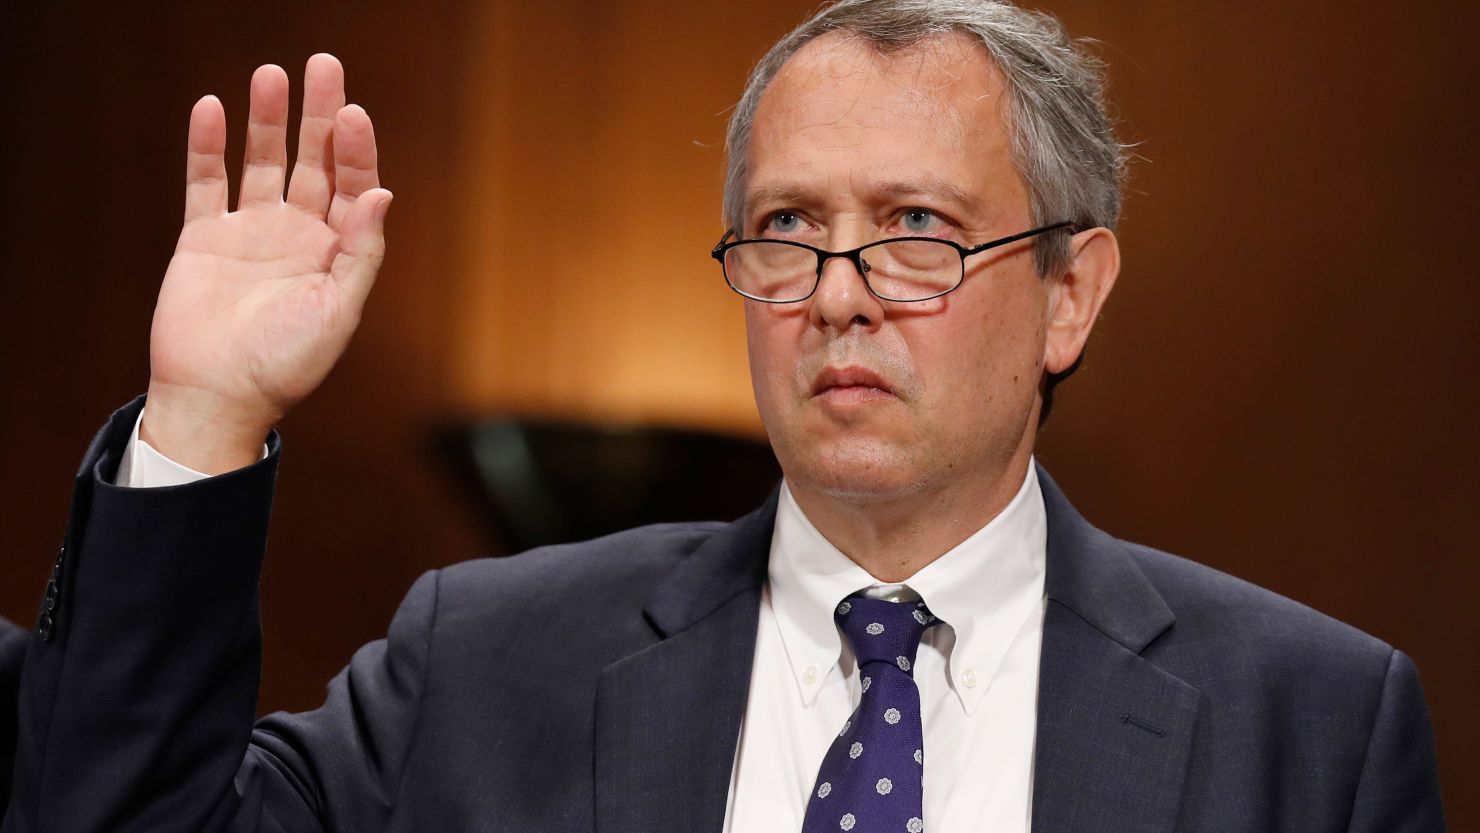 Thomas Farr is sworn in 2017 during a Senate Judiciary Committee hearing on his nomination to be a District Judge on the United States District Court for the Eastern District of North Carolina, on Capitol Hill in Washington. (AP Photo/Alex Brandon, File)